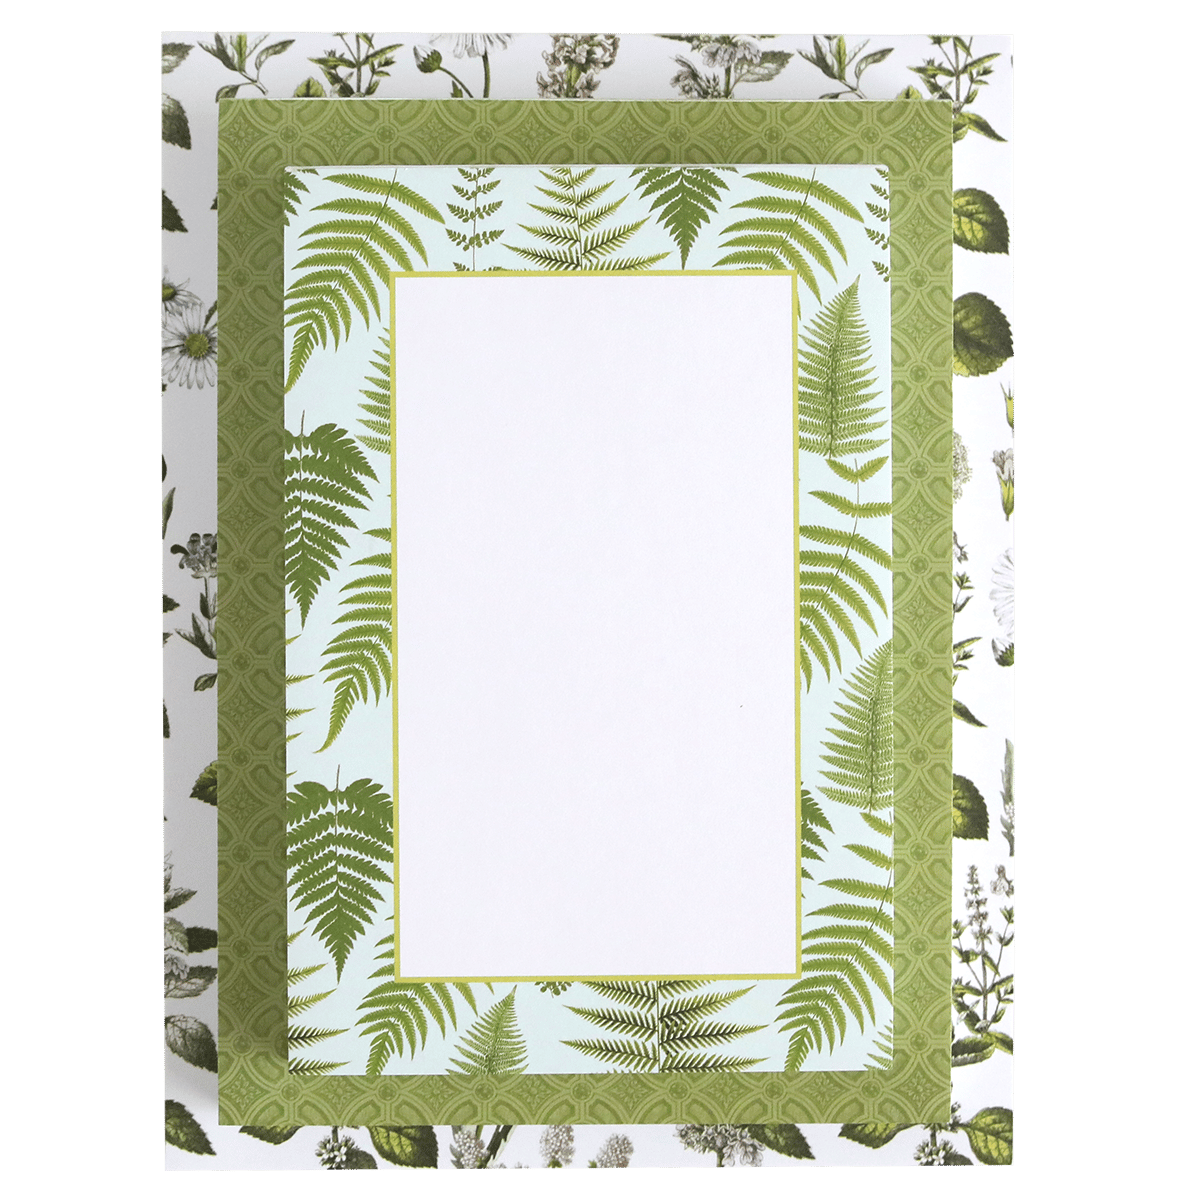 a green and white picture frame with leaves on it.